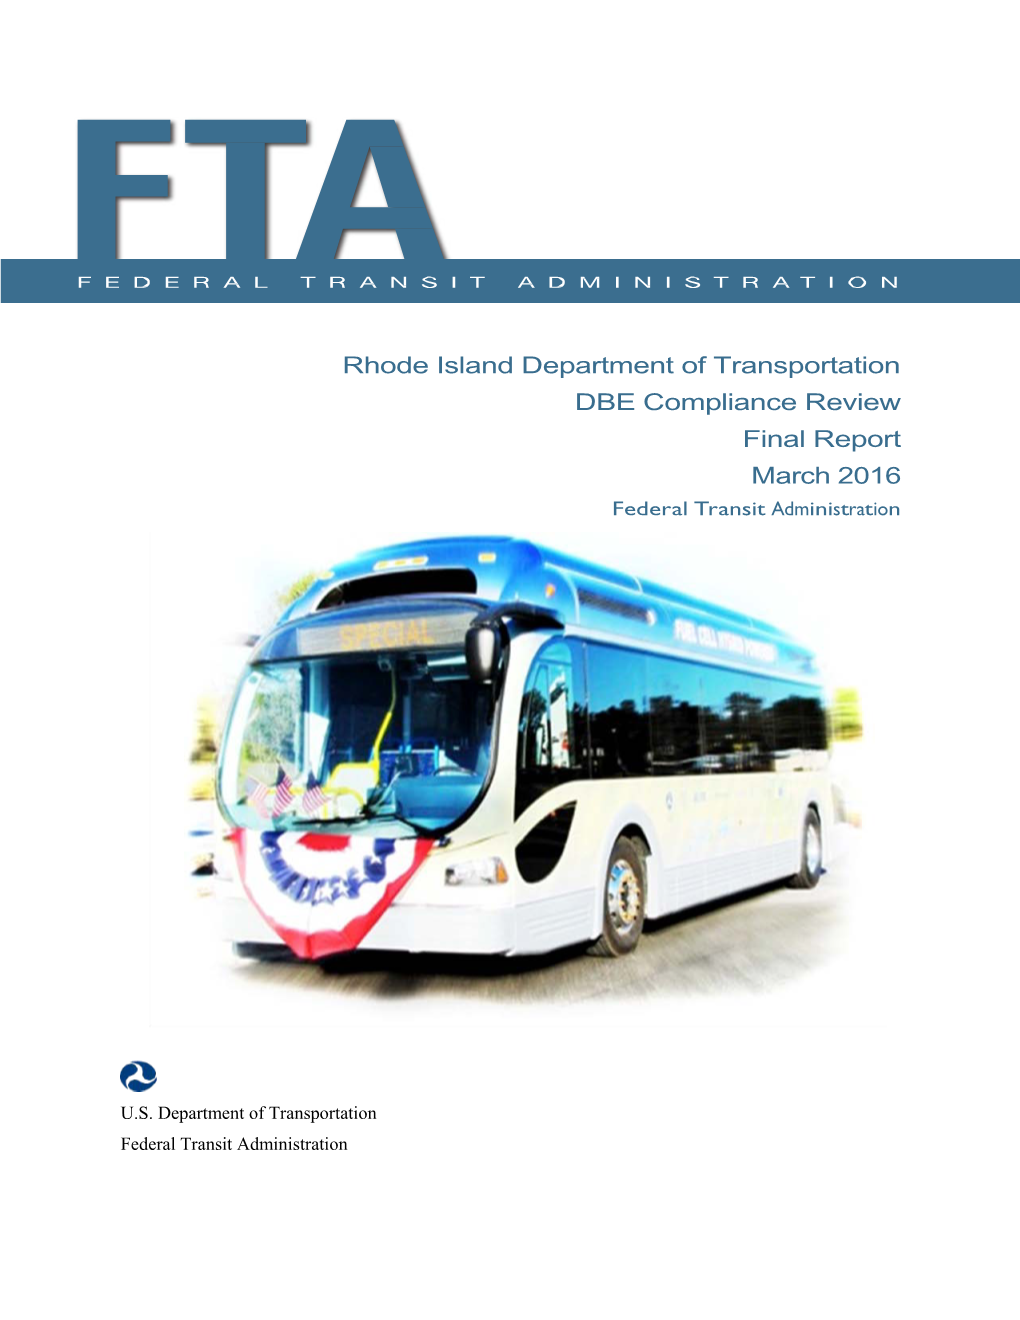 Rhode Island Department of Transportation DBE Compliance Review Report, March 2016